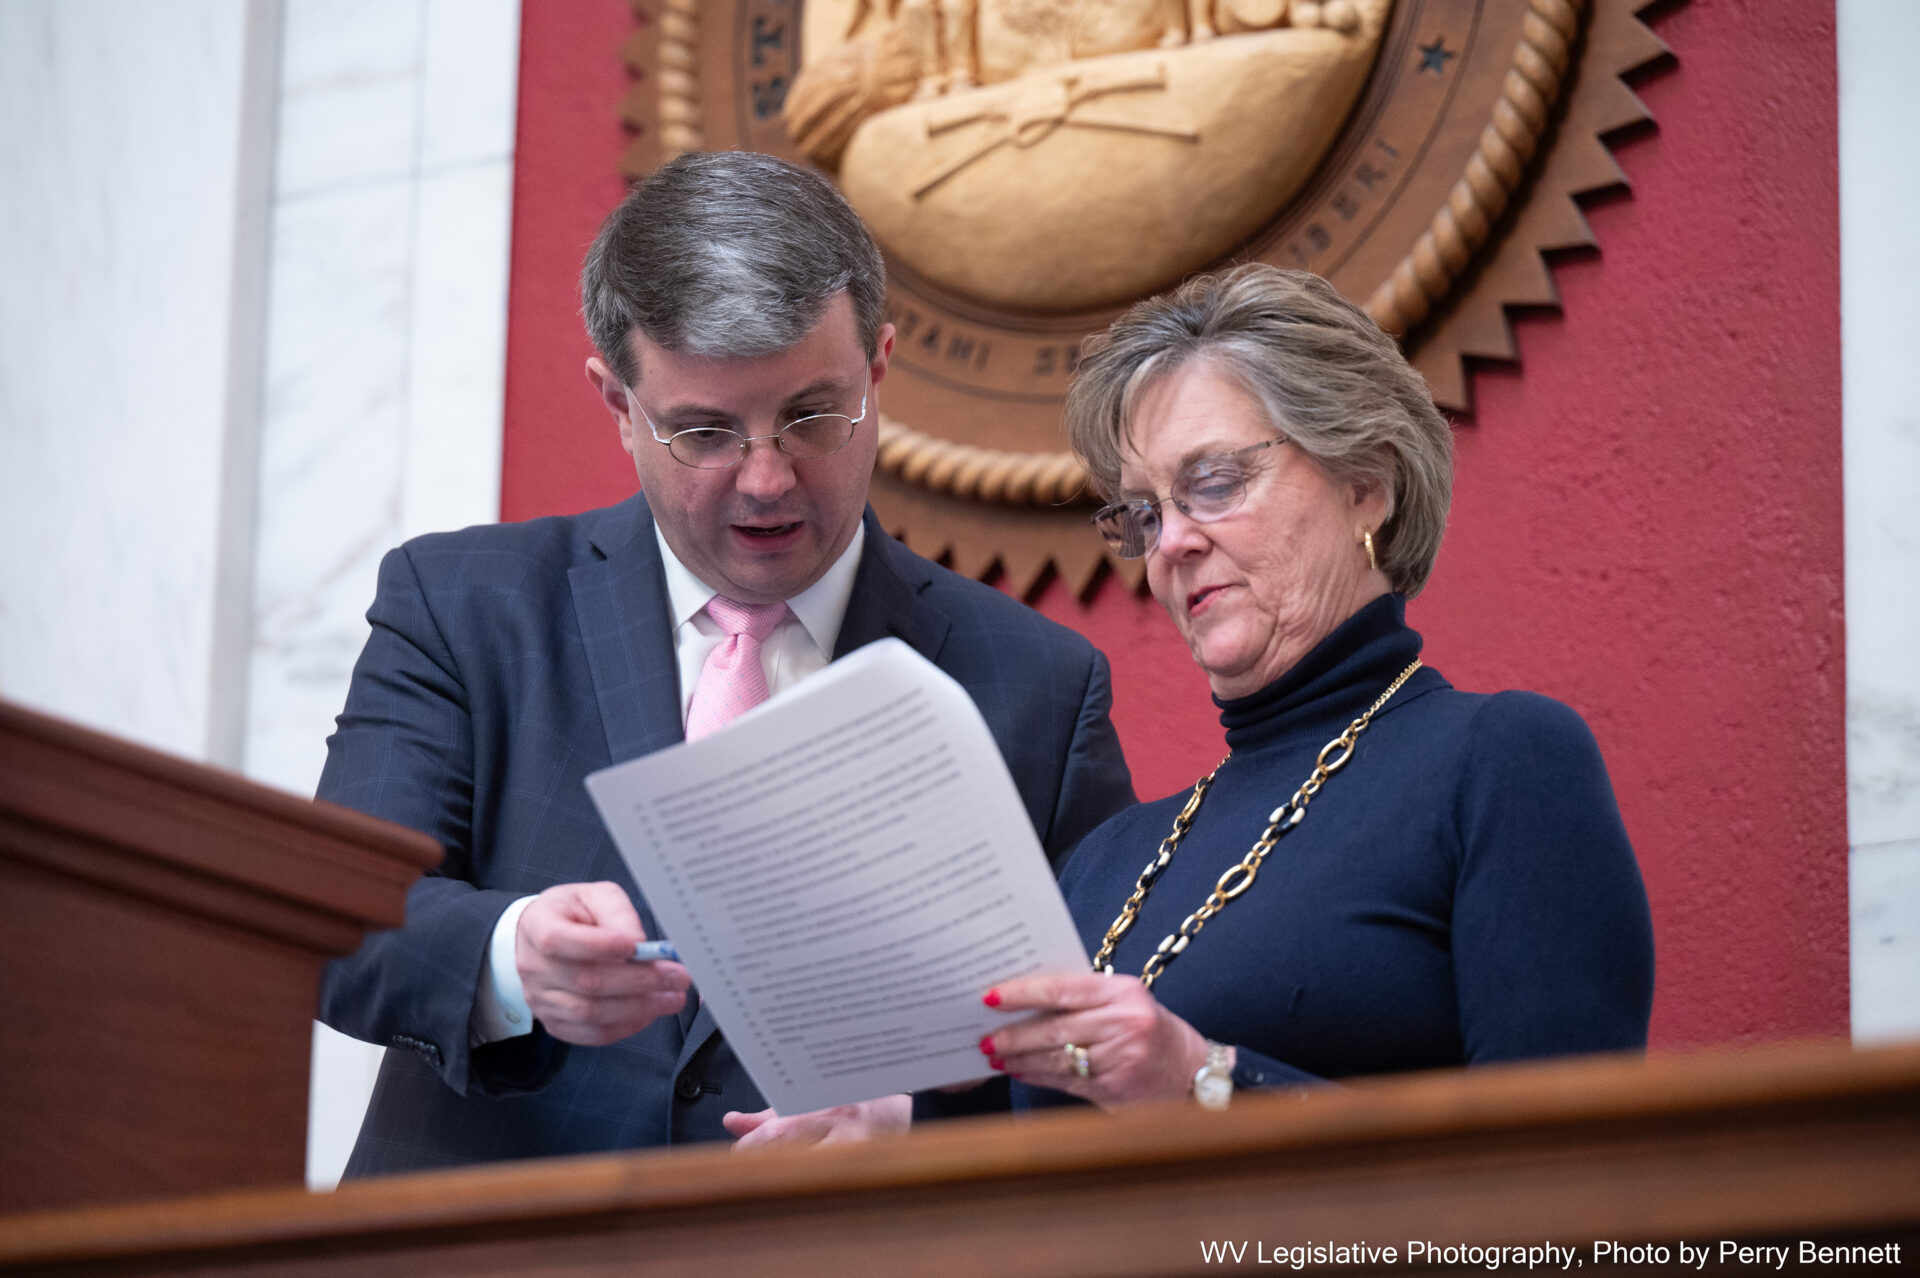 Social Security Tax, Broadband Pole Attachments, Gravesite Visits On House Agenda